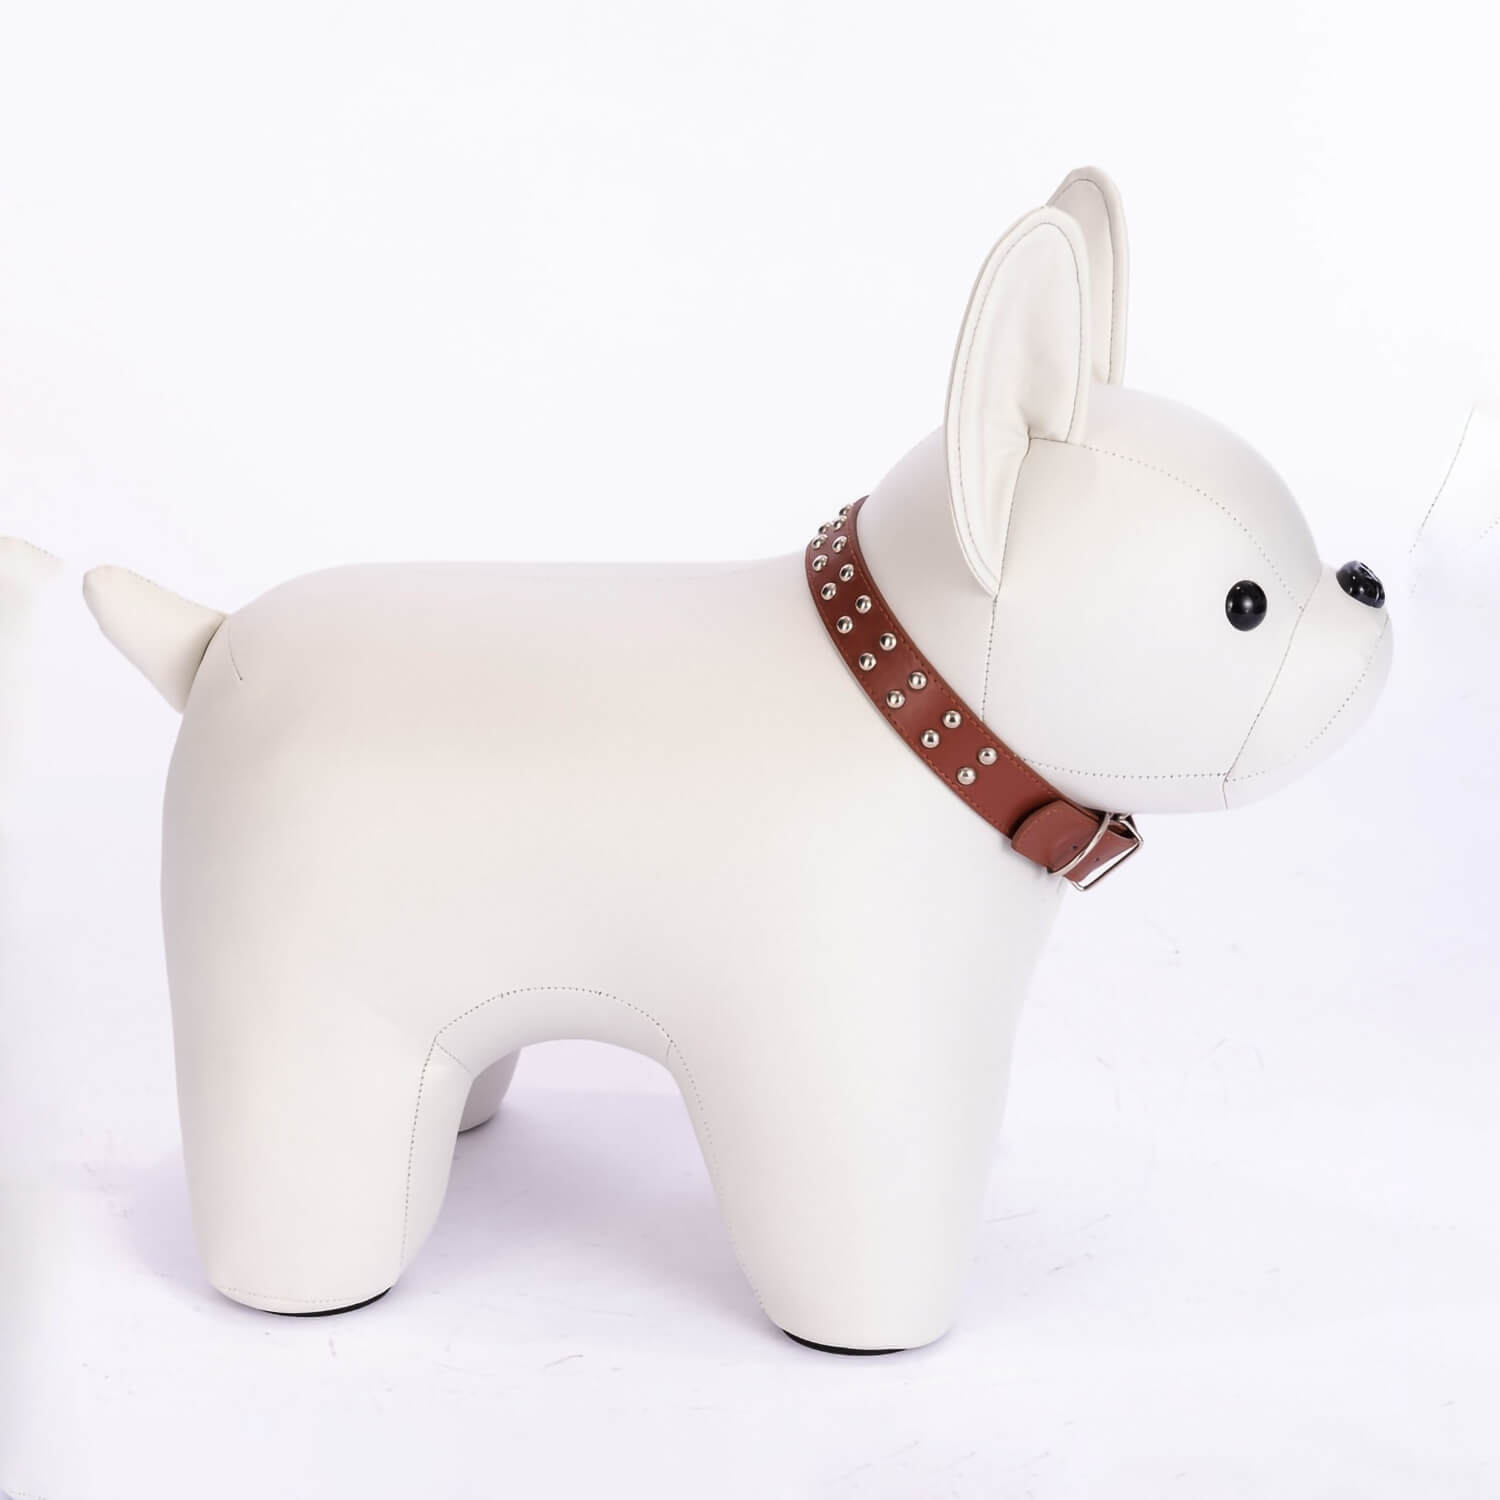 Side shot of off white colored French Bulldog shaped stool